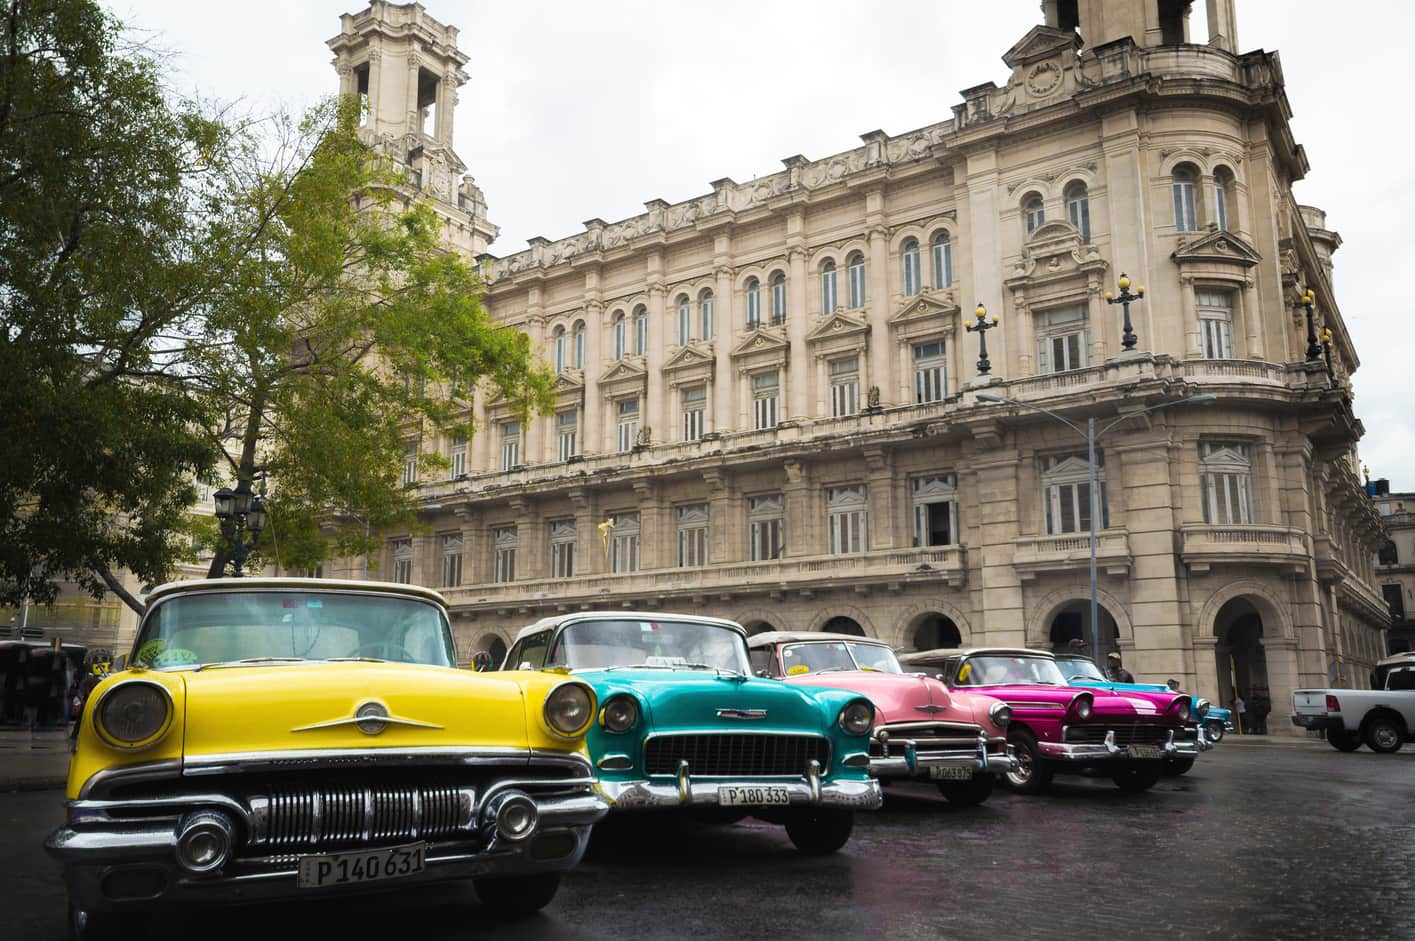  old taxi car colors havana cuba itinerary for 15 days